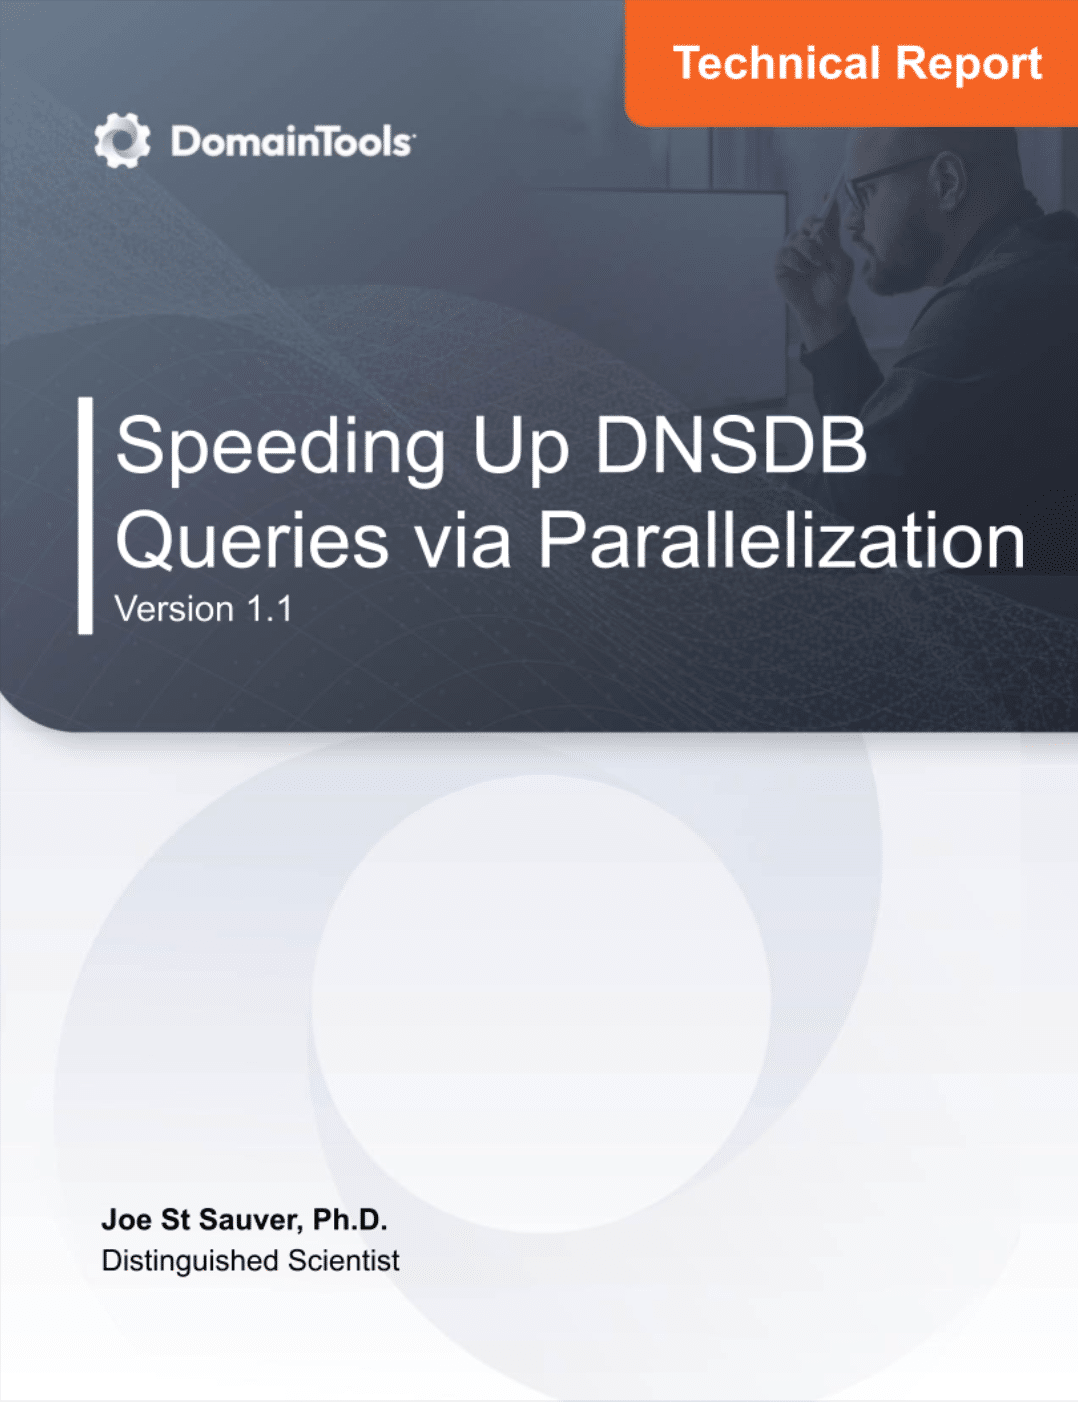 Cover of a technical report titled "Speeding Up DNSDB Queries via Parallelization, Version 1.1" by Joe St Sauvier, Ph.D., featuring a thoughtful man looking at a computer